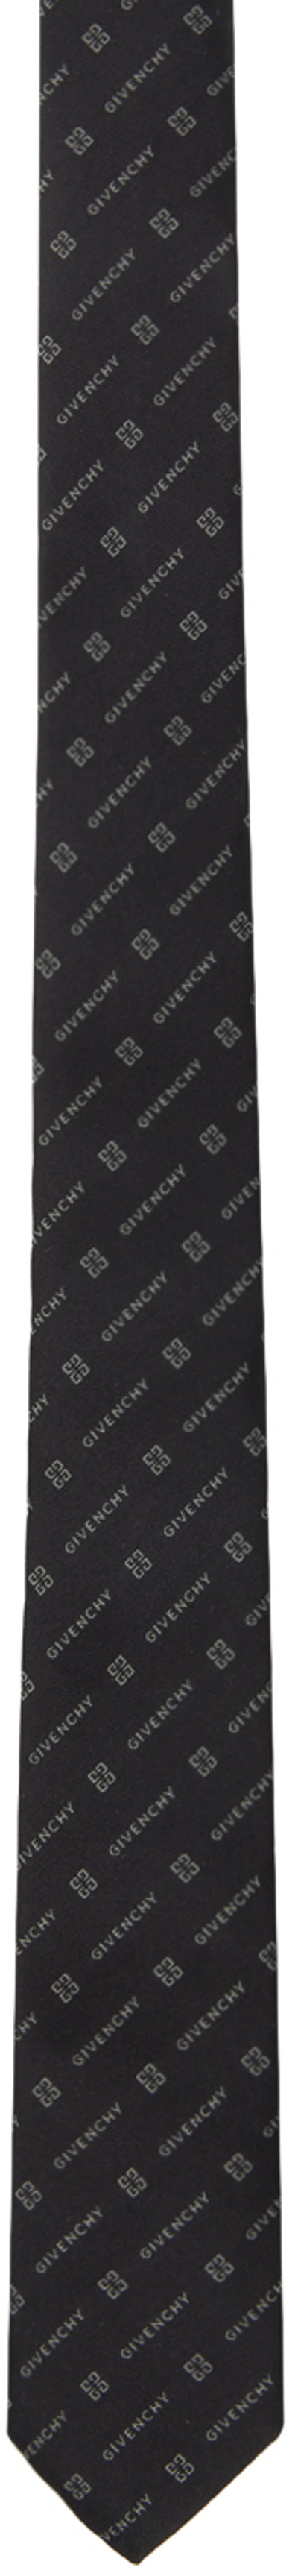 Givenchy Black 4g Tie